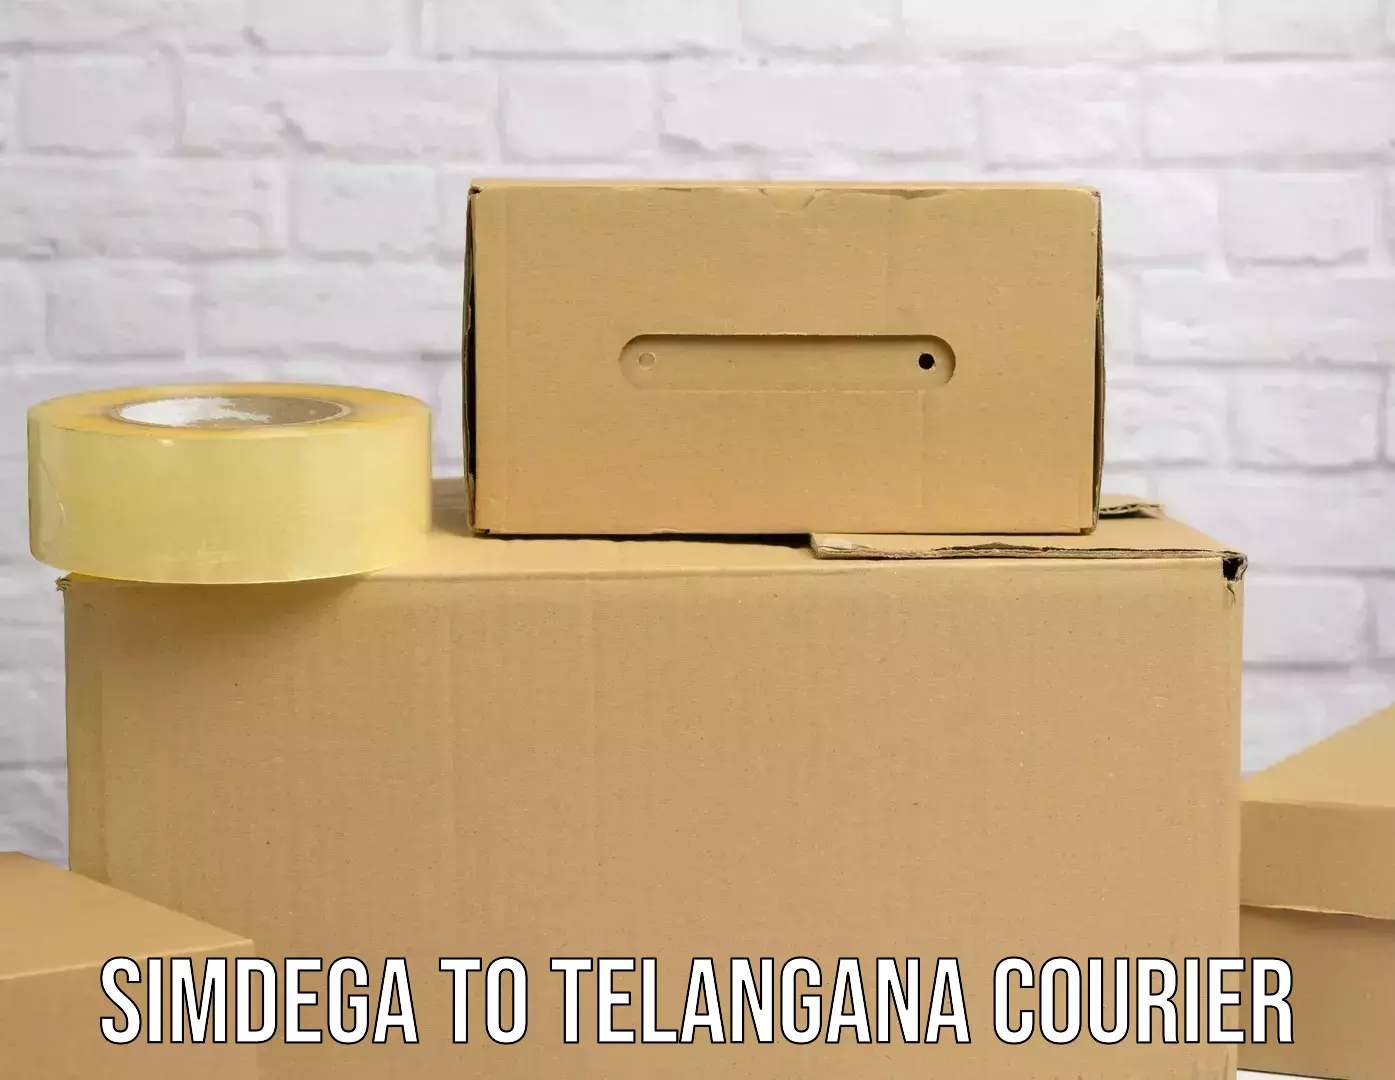 Residential courier service in Simdega to Kothur